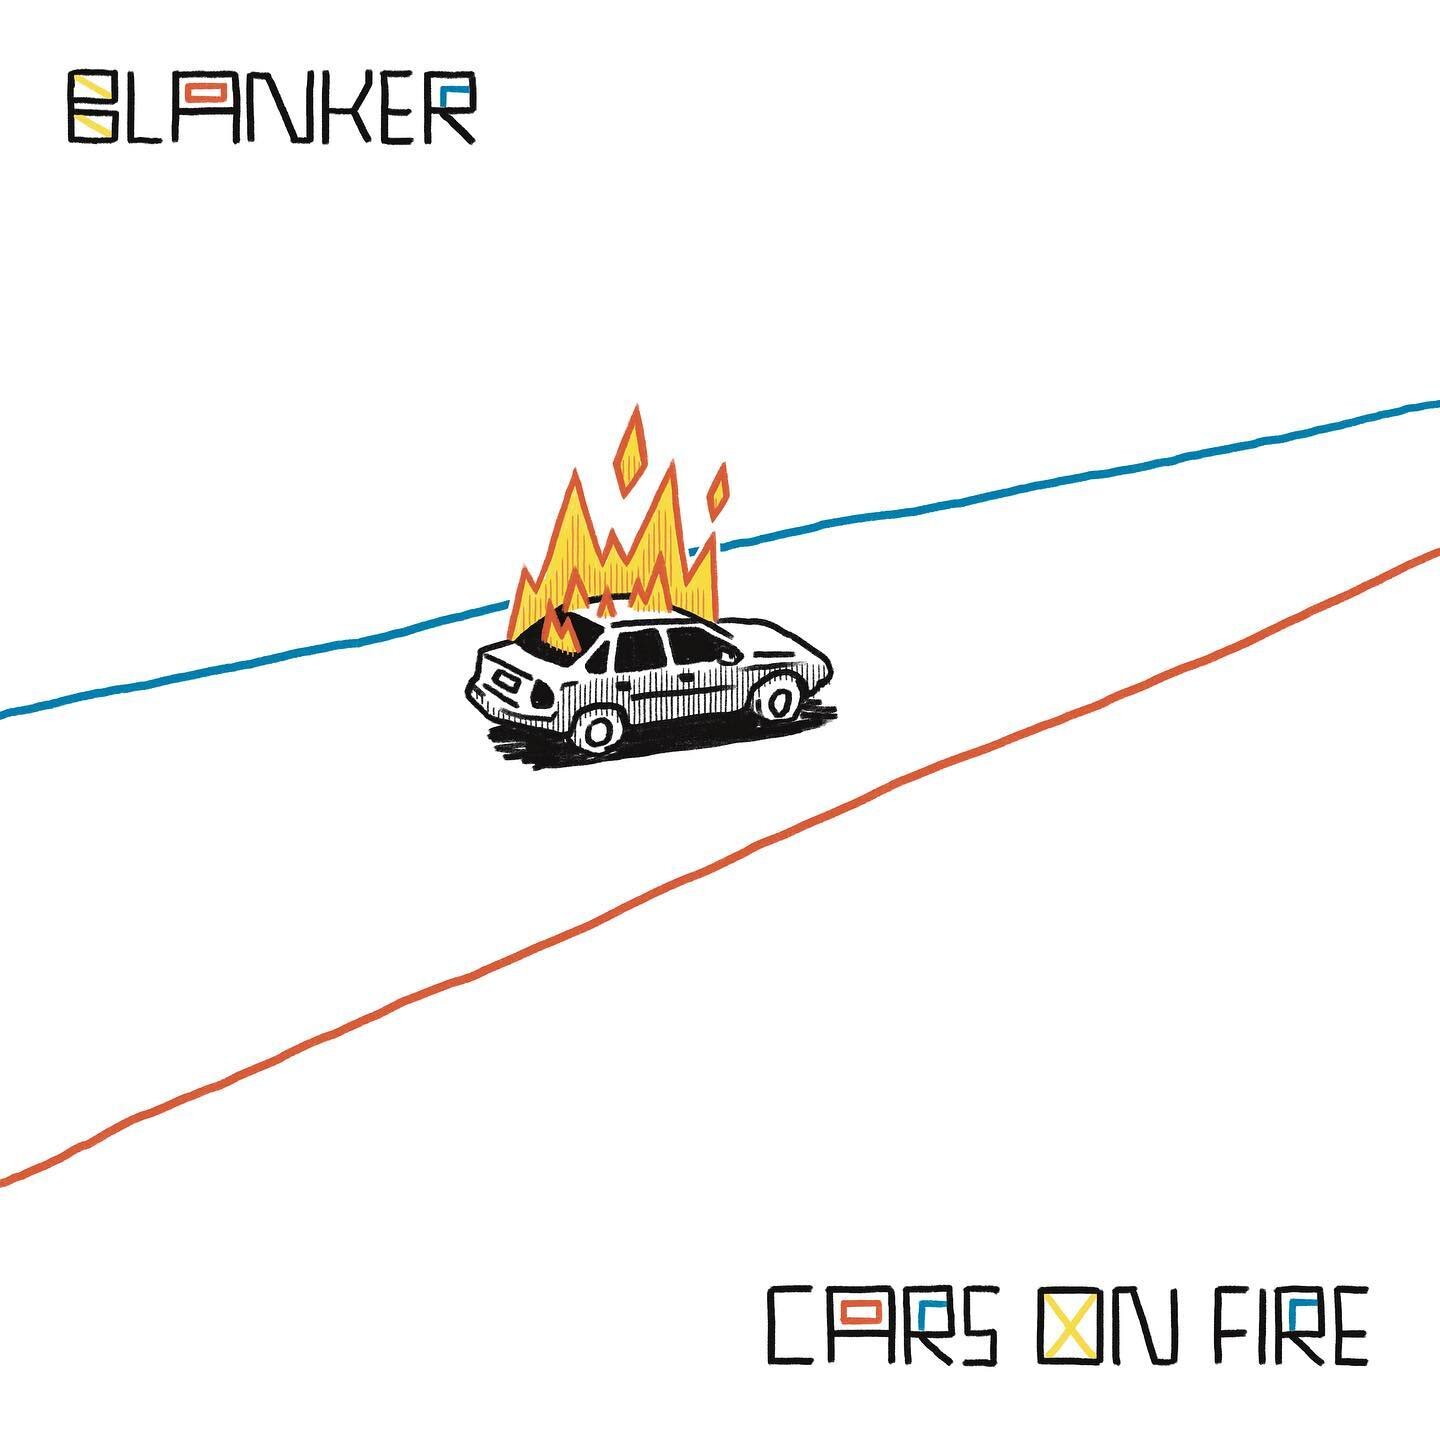 Artwork for @blankermusic&lsquo;s new release, CARS ON FIRE, now available on Bandcamp and the usual music streaming outlets. Swipe for bonus art, and go have a listen!